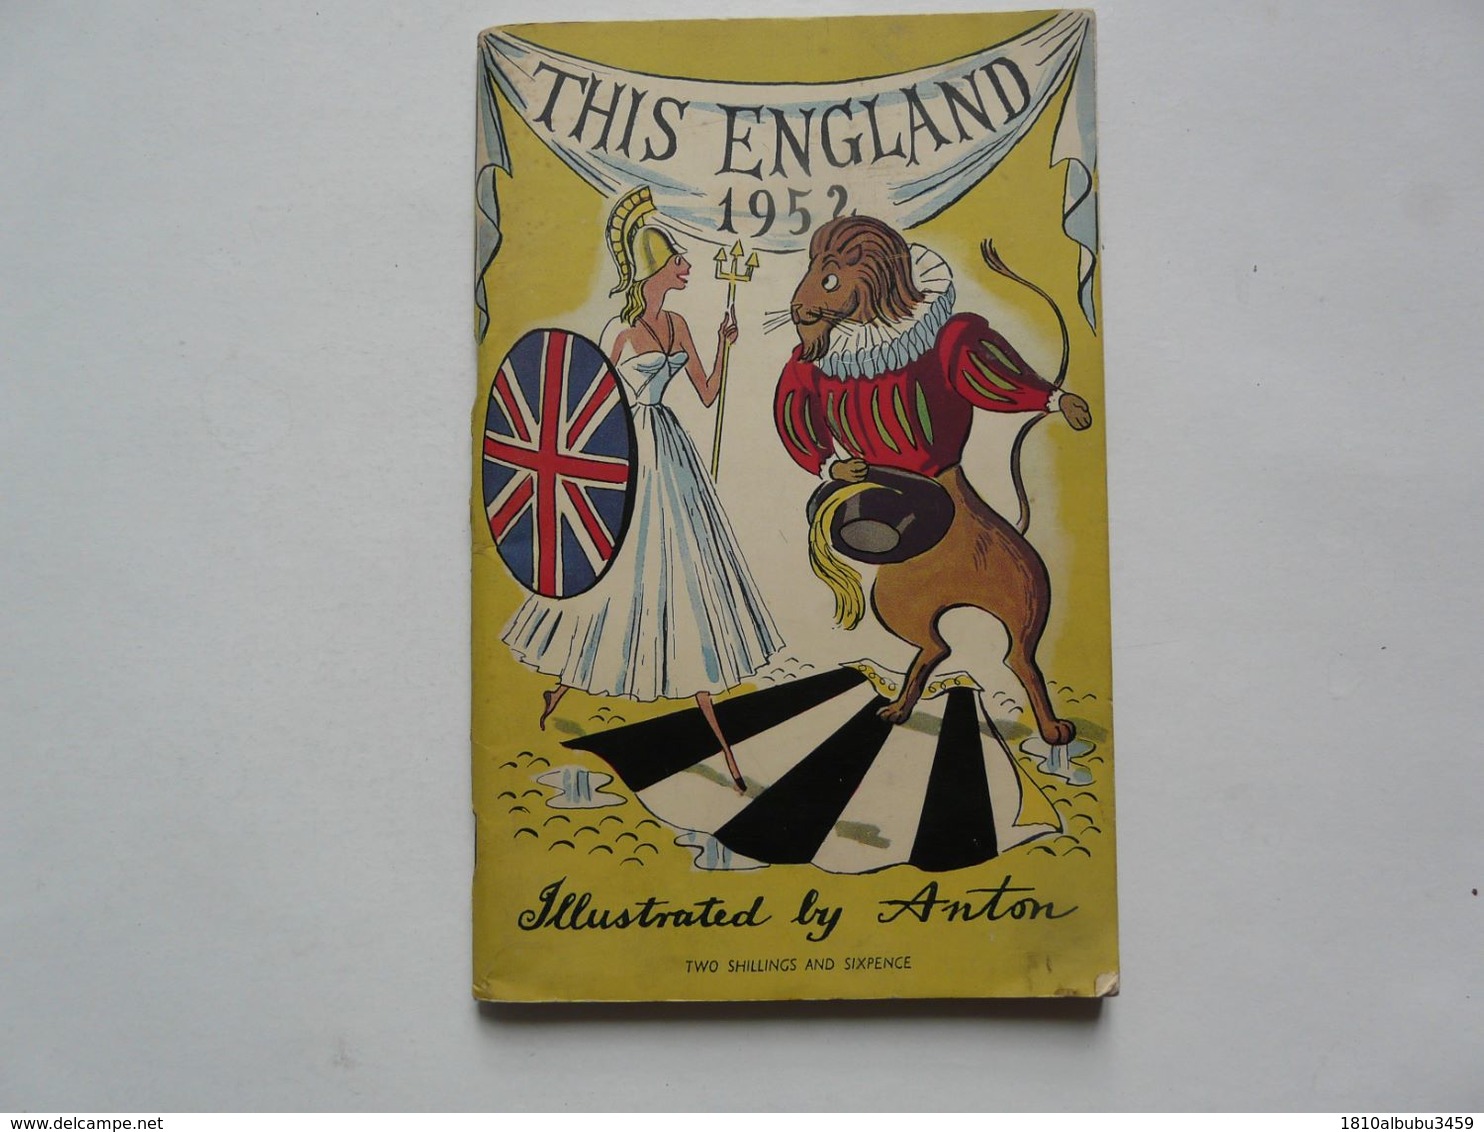 THIS ENGLAND 1952 - ILLUSTRATED BY ANTON - Cultural